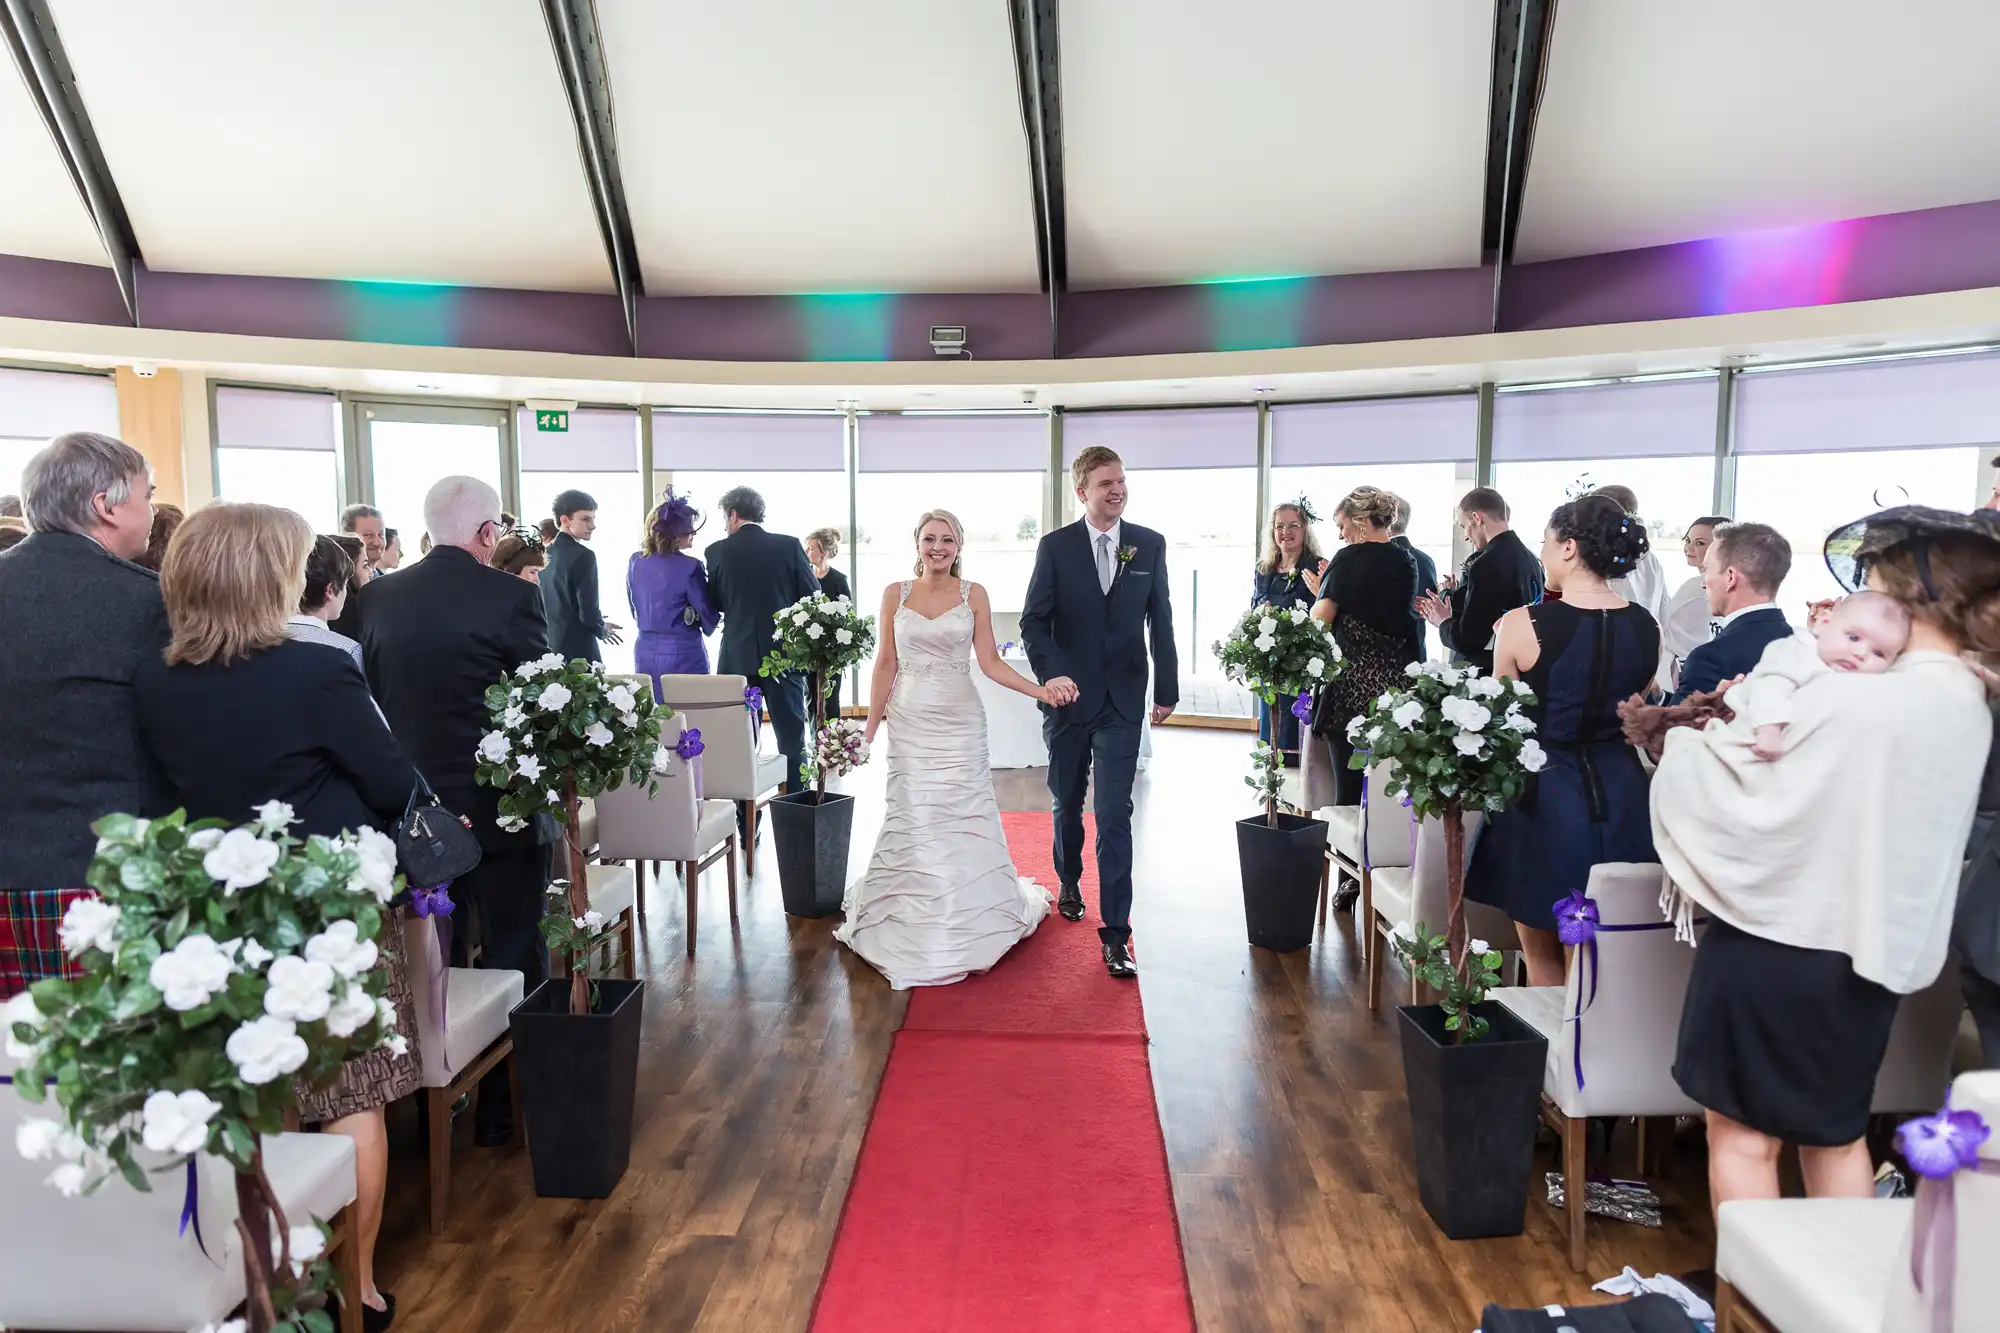 A bride and groom walk down the aisle smiling, surrounded by guests in a modern venue with large windows and purple lighting.